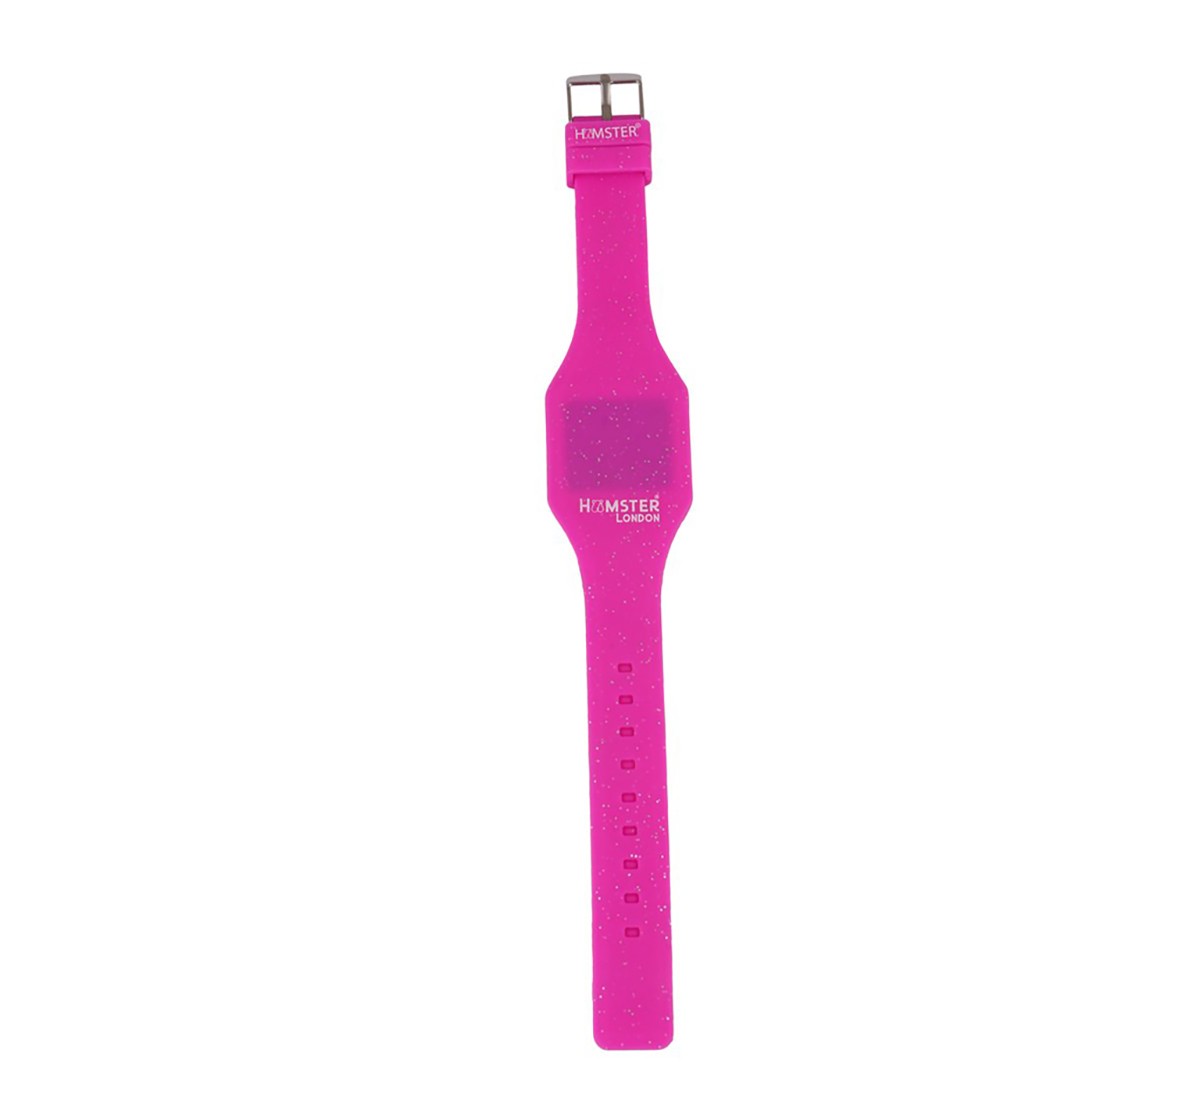 Hamster London Glitter Watch for age 3Y+ (Pink)